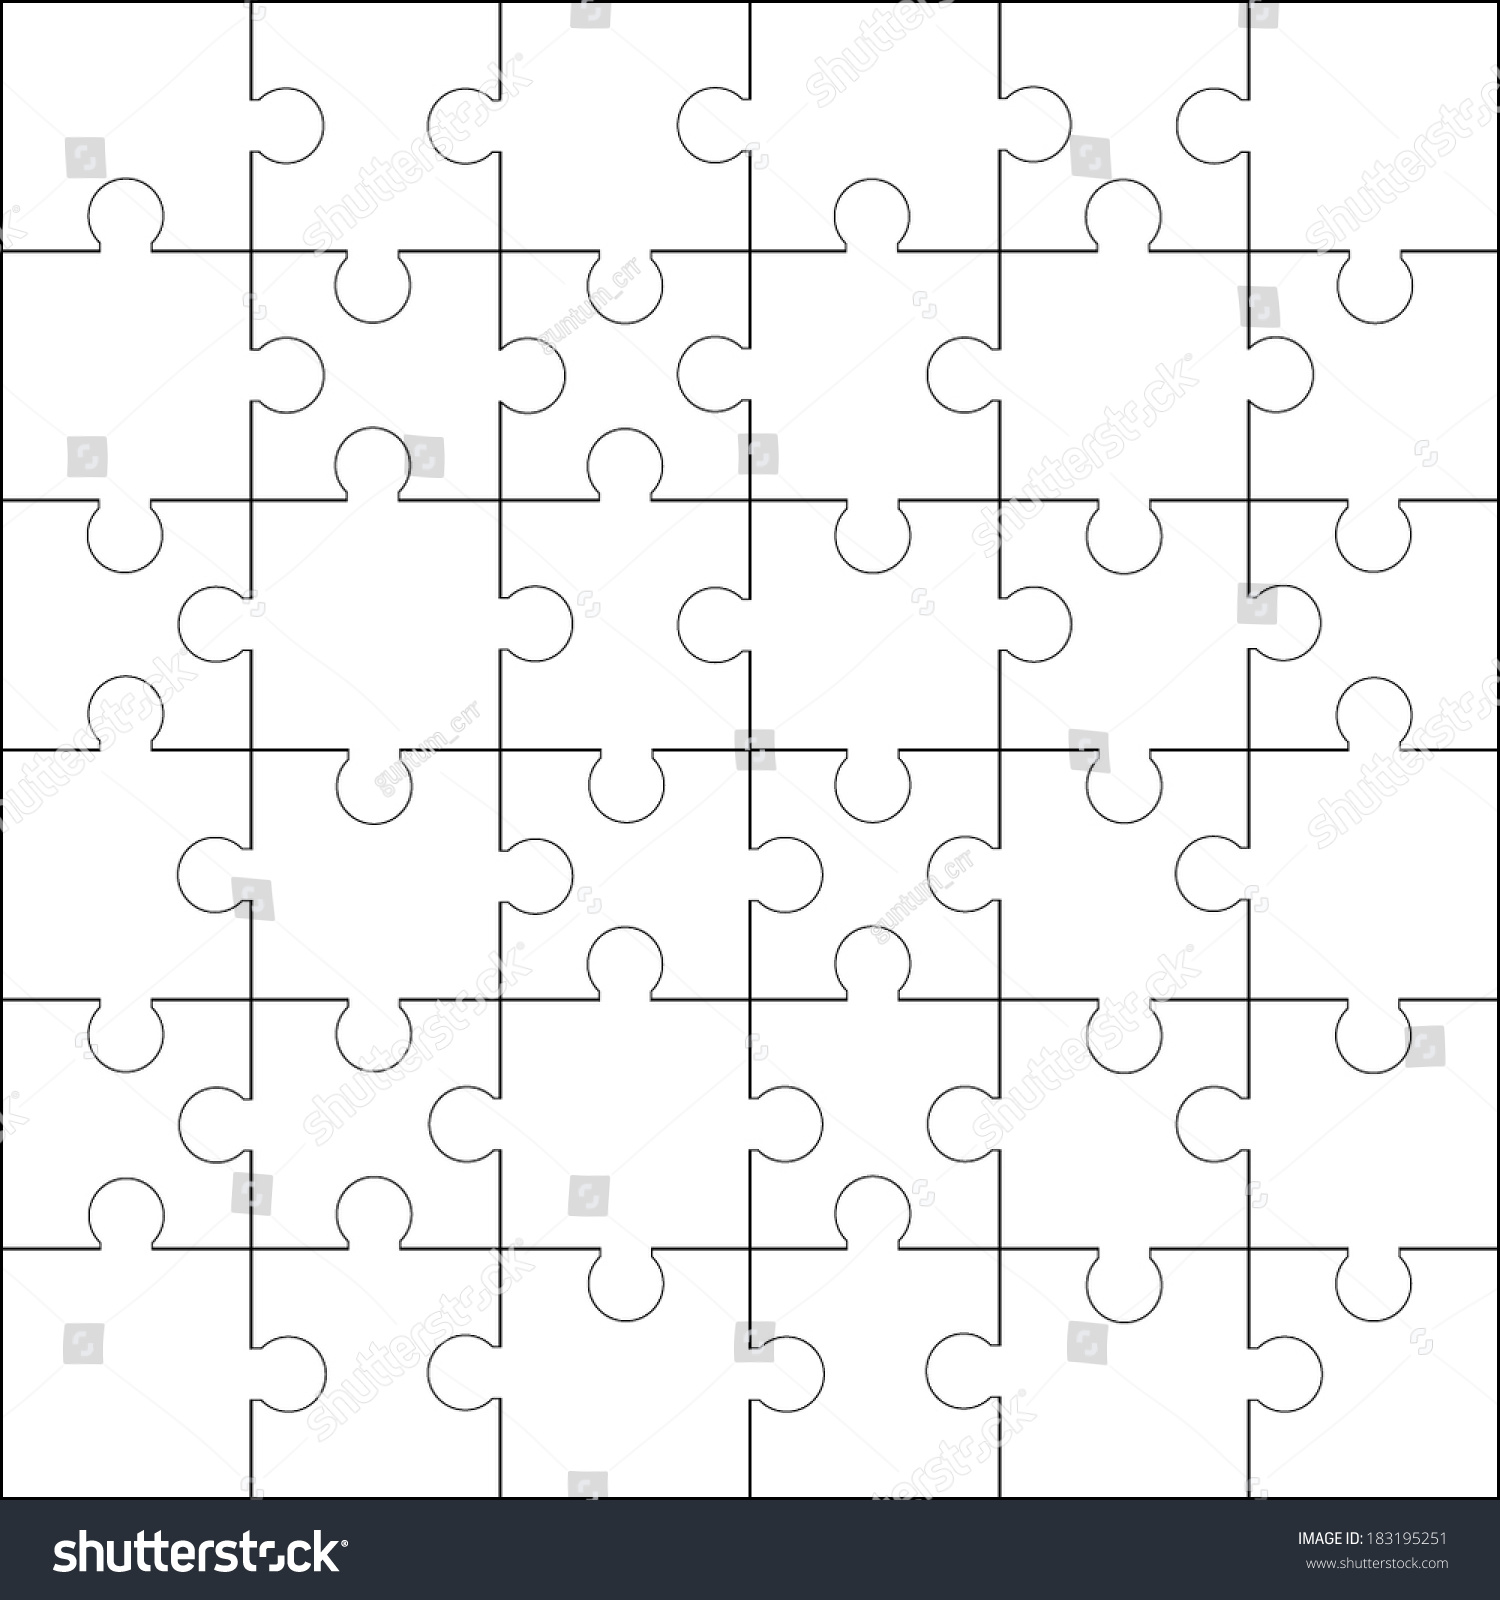 36 Jigsaw Puzzle Blank Template Or Cutting Guidelines Stock Vector ...